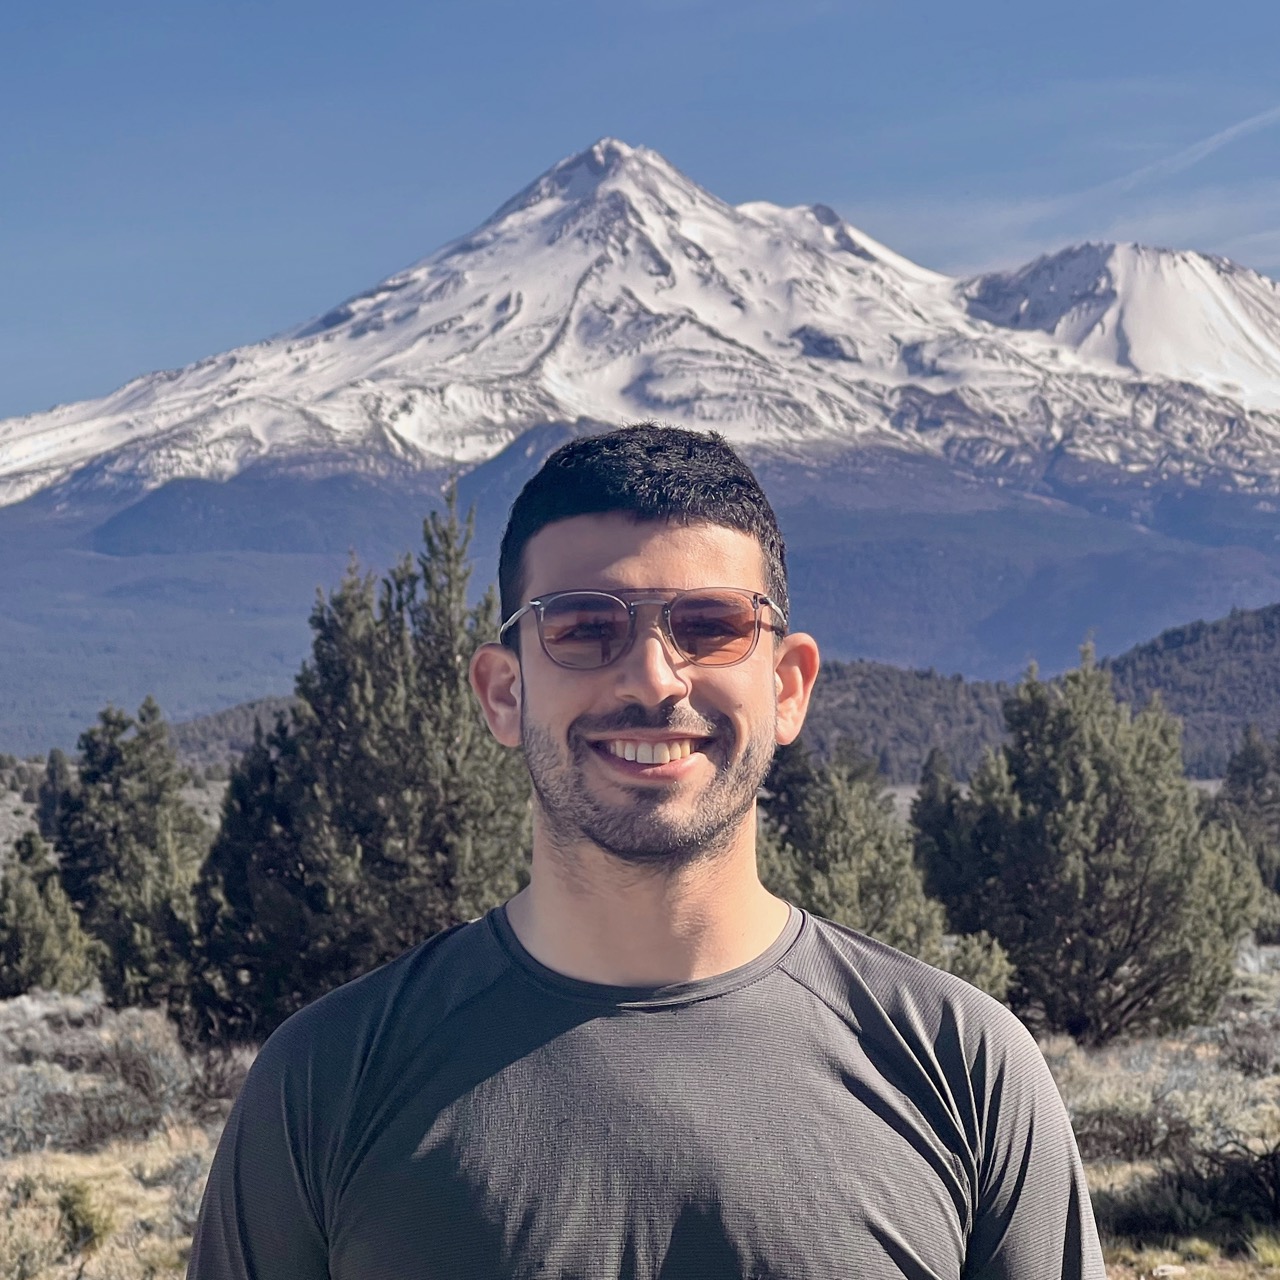 Portrait of me, smiling, wearing sunglasses and a gray shirt. There's some scrubland in the midground. The North side of Mount Shasta rises behind me.